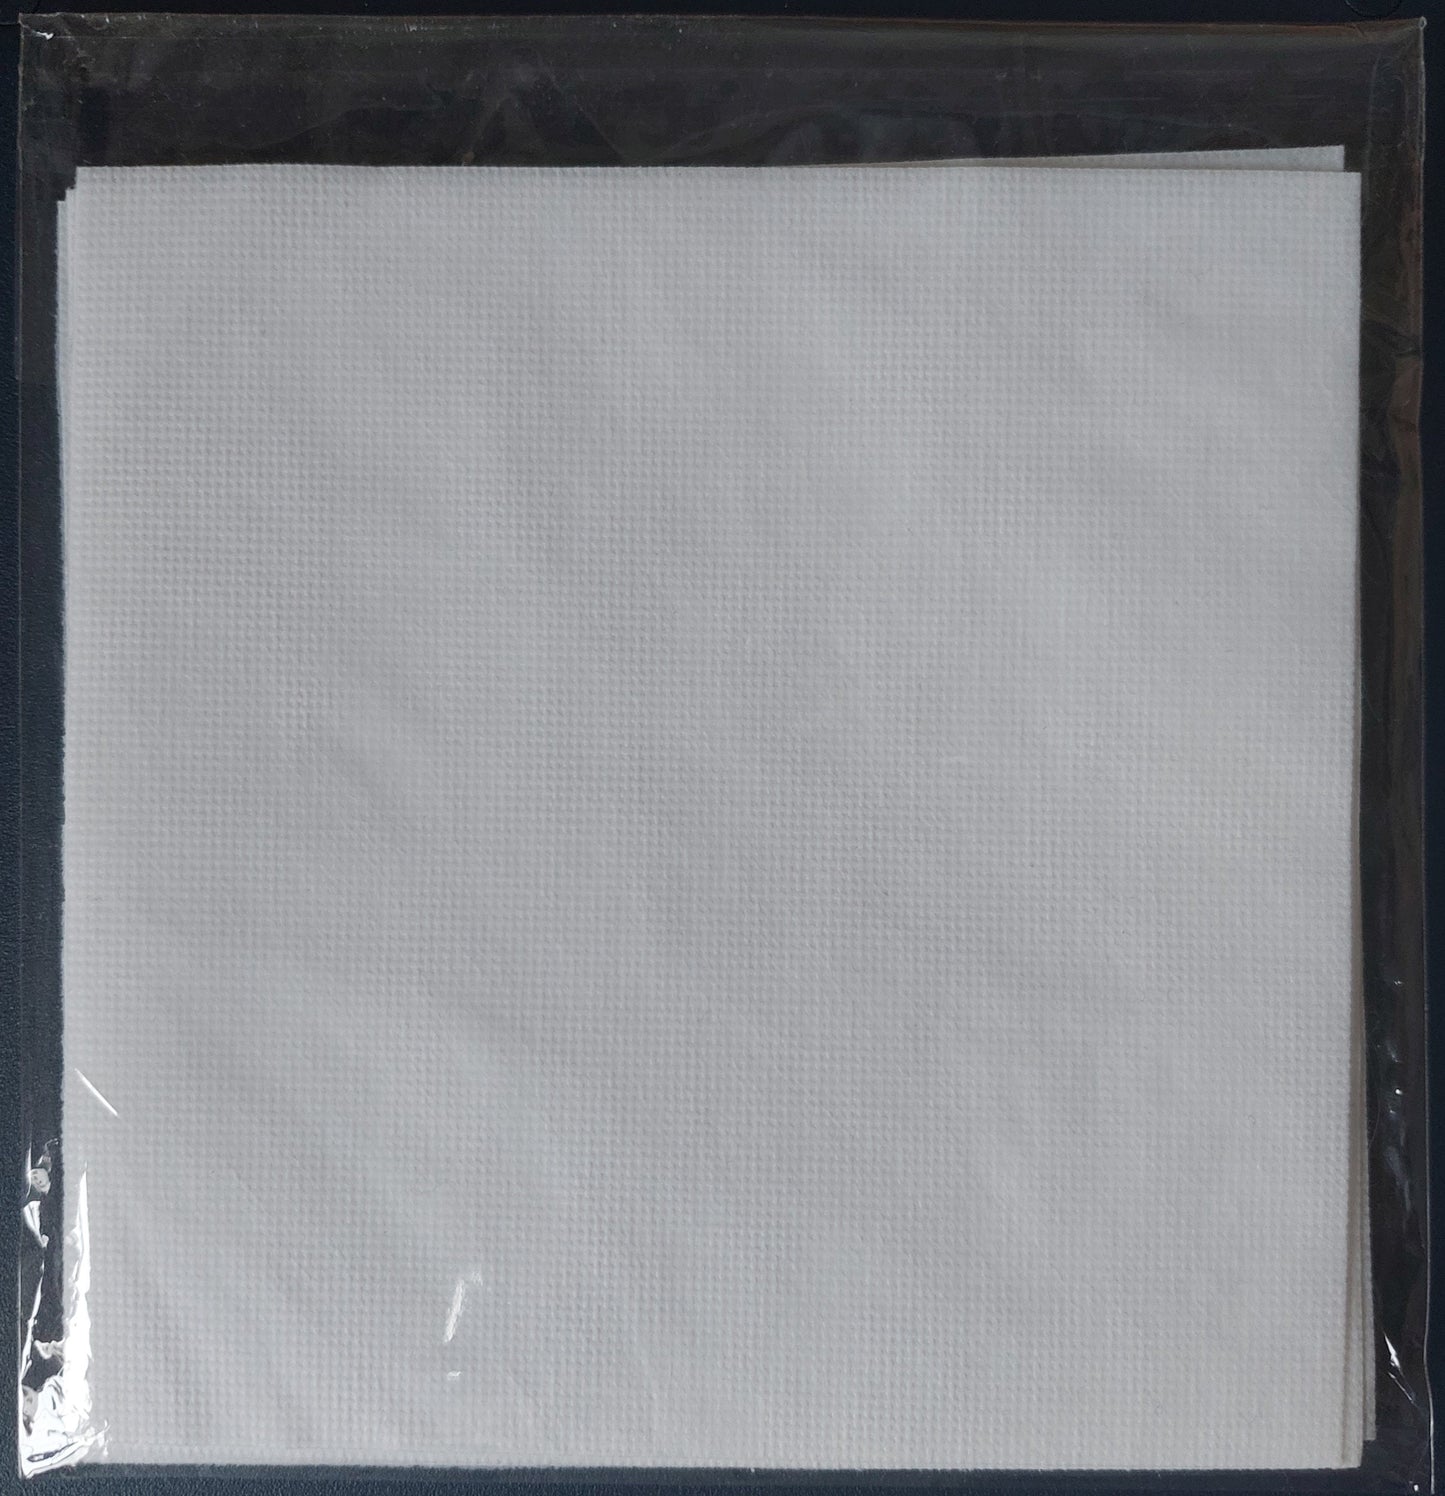 25 Japanese Non-woven Fabric Inners for CD/DVD/UHD/BD